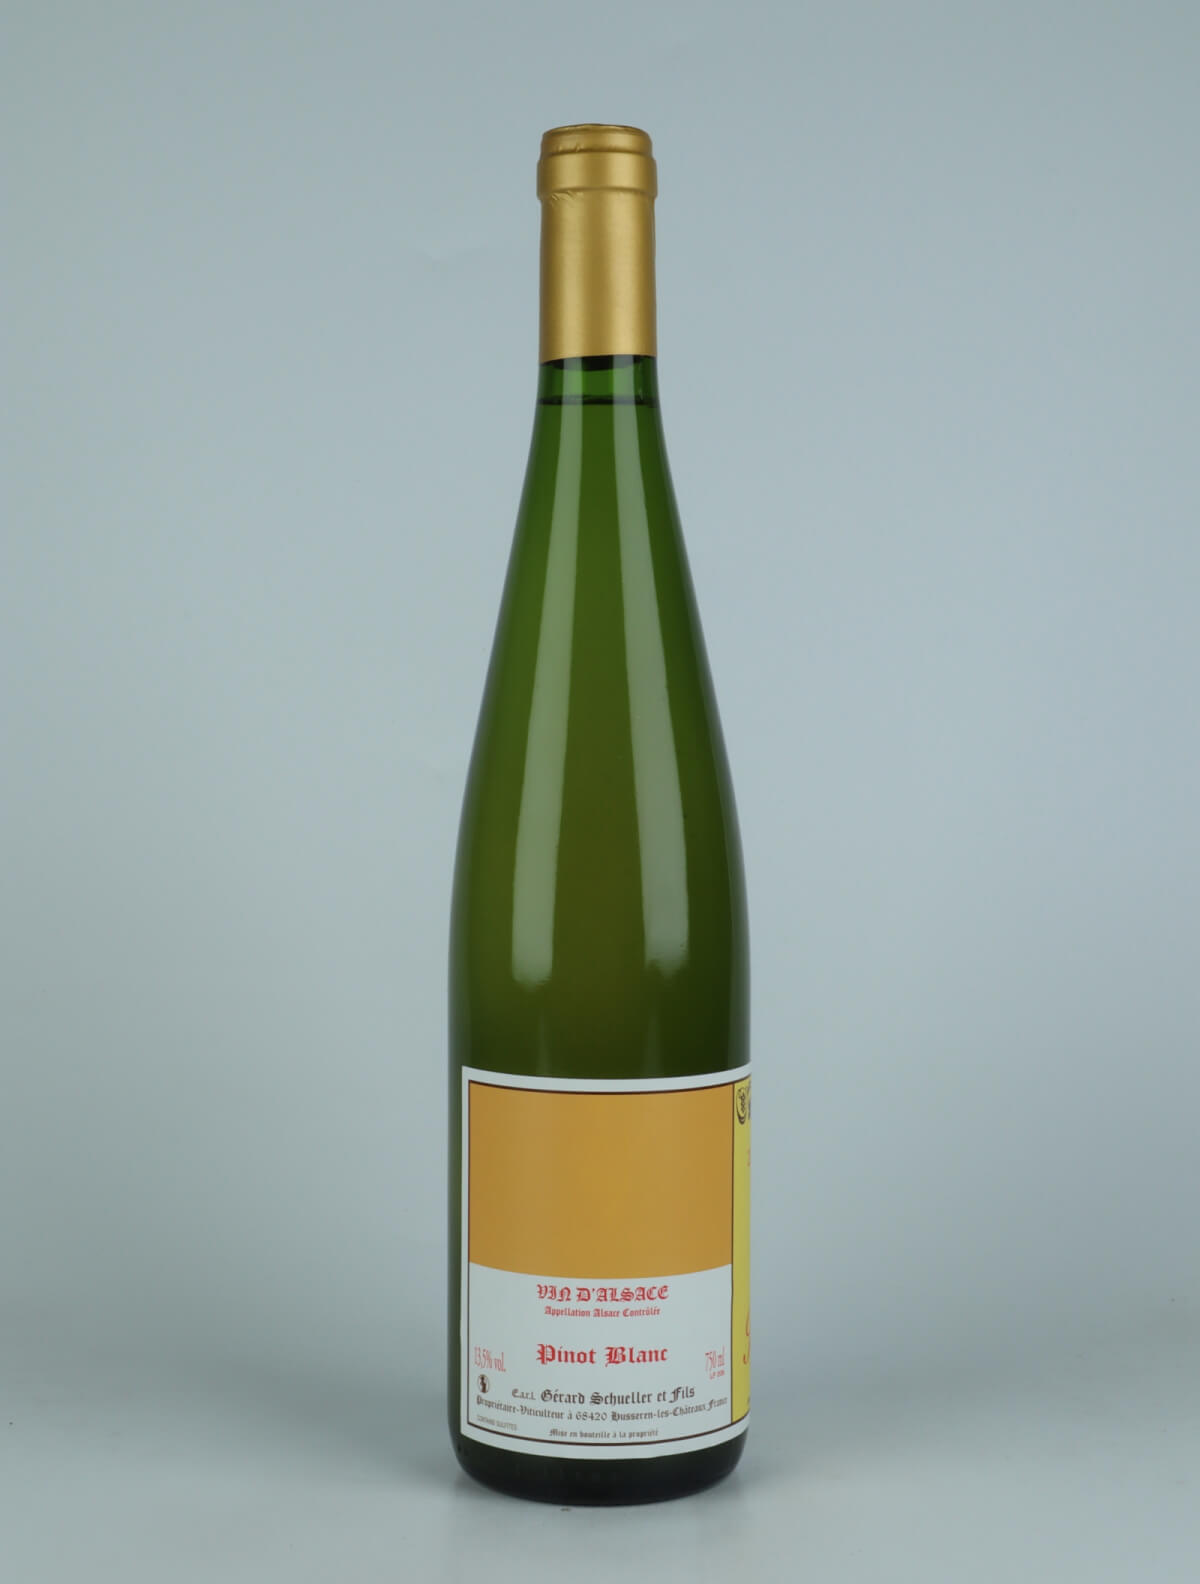 A bottle 2022 Pinot Blanc H White wine from Gérard Schueller, Alsace in France